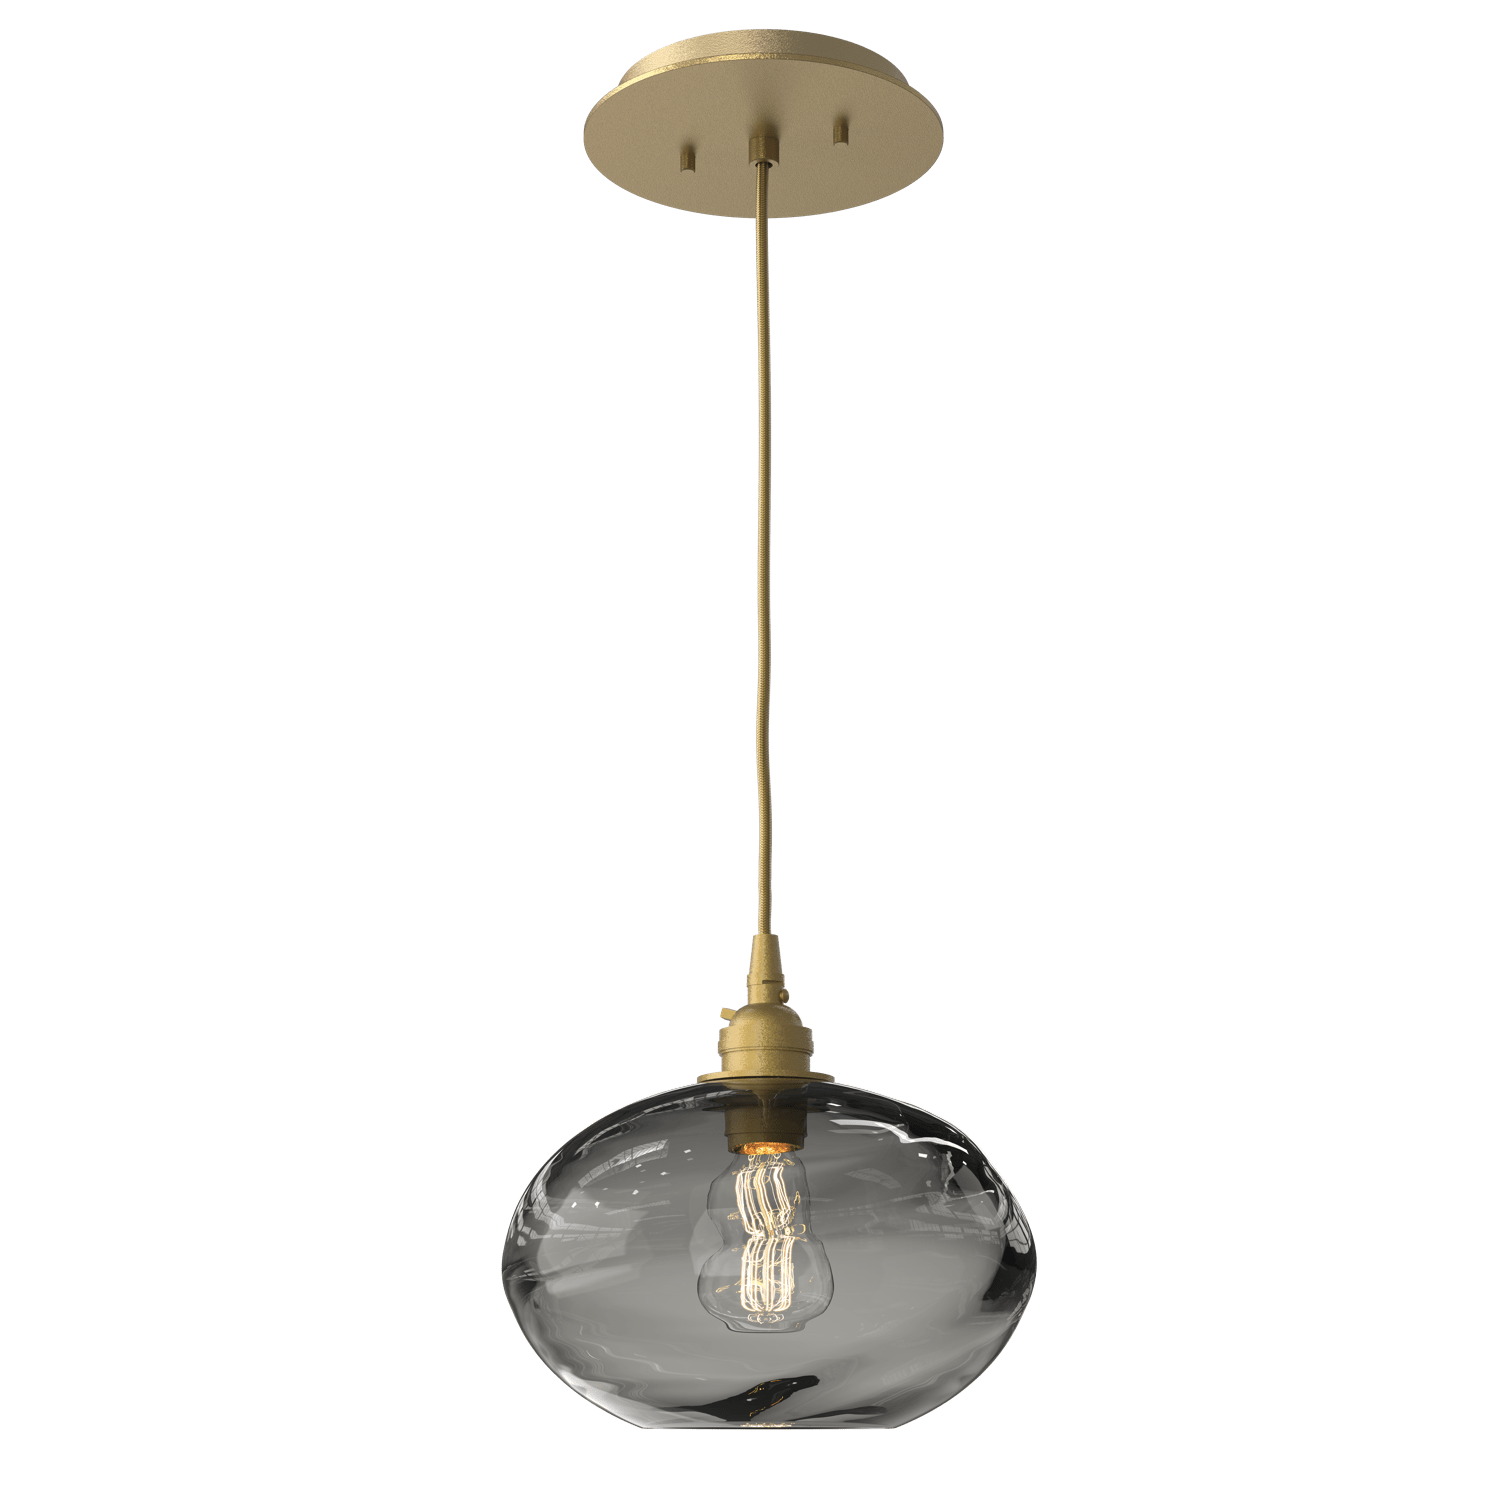 LAB0036-01-GB-OS-Hammerton-Studio-Optic-Blown-Glass-Coppa-pendant-light-with-gilded-brass-finish-and-optic-smoke-blown-glass-shades-and-incandescent-lamping